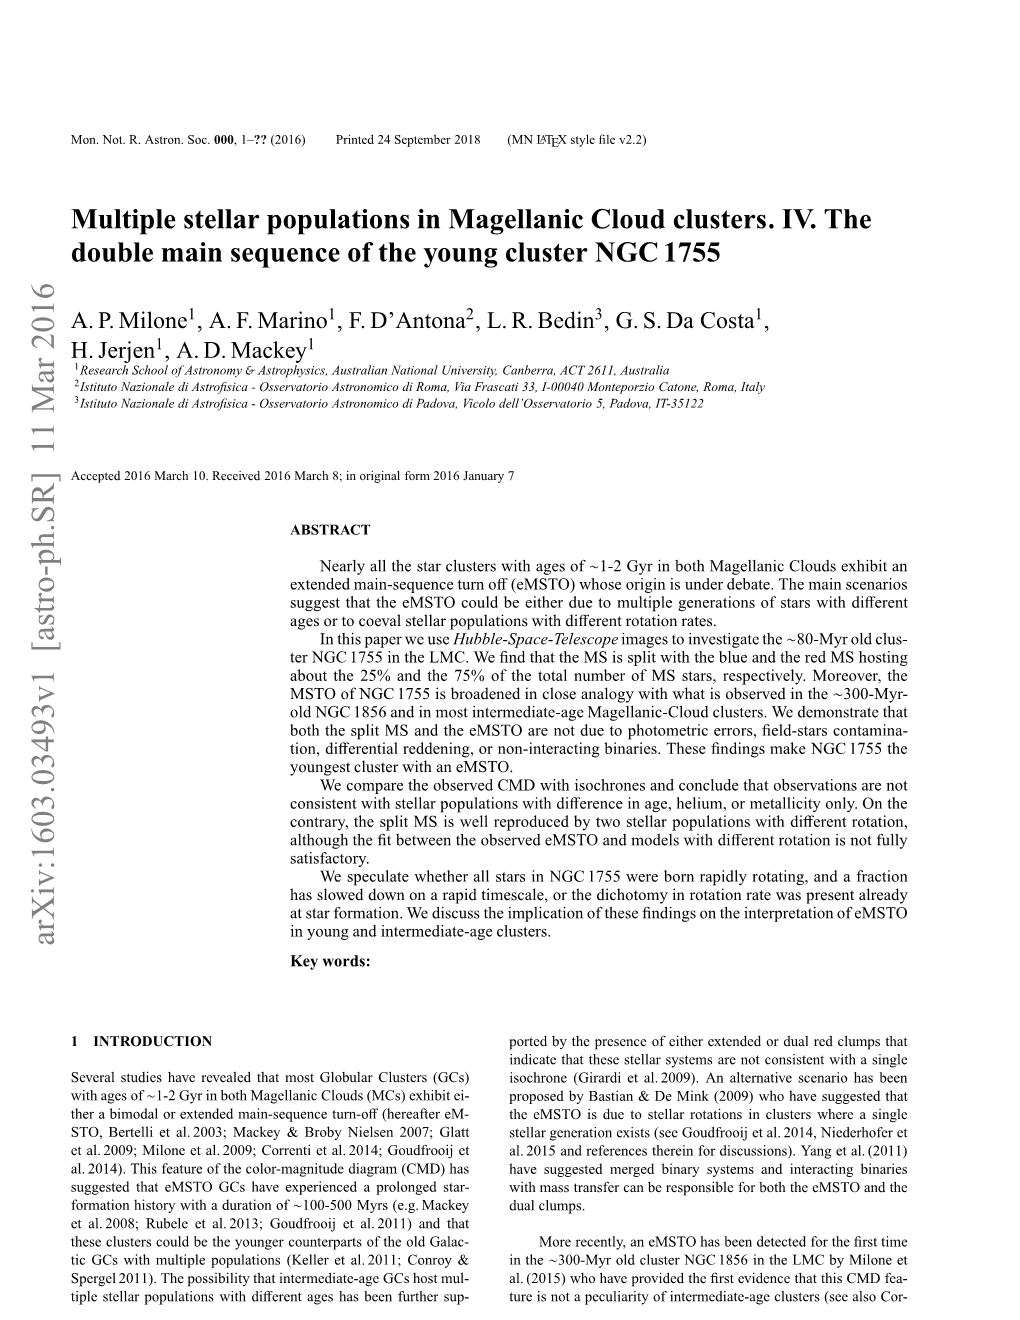 Multiple Stellar Populations in Magellanic Cloud Clusters. IV. The